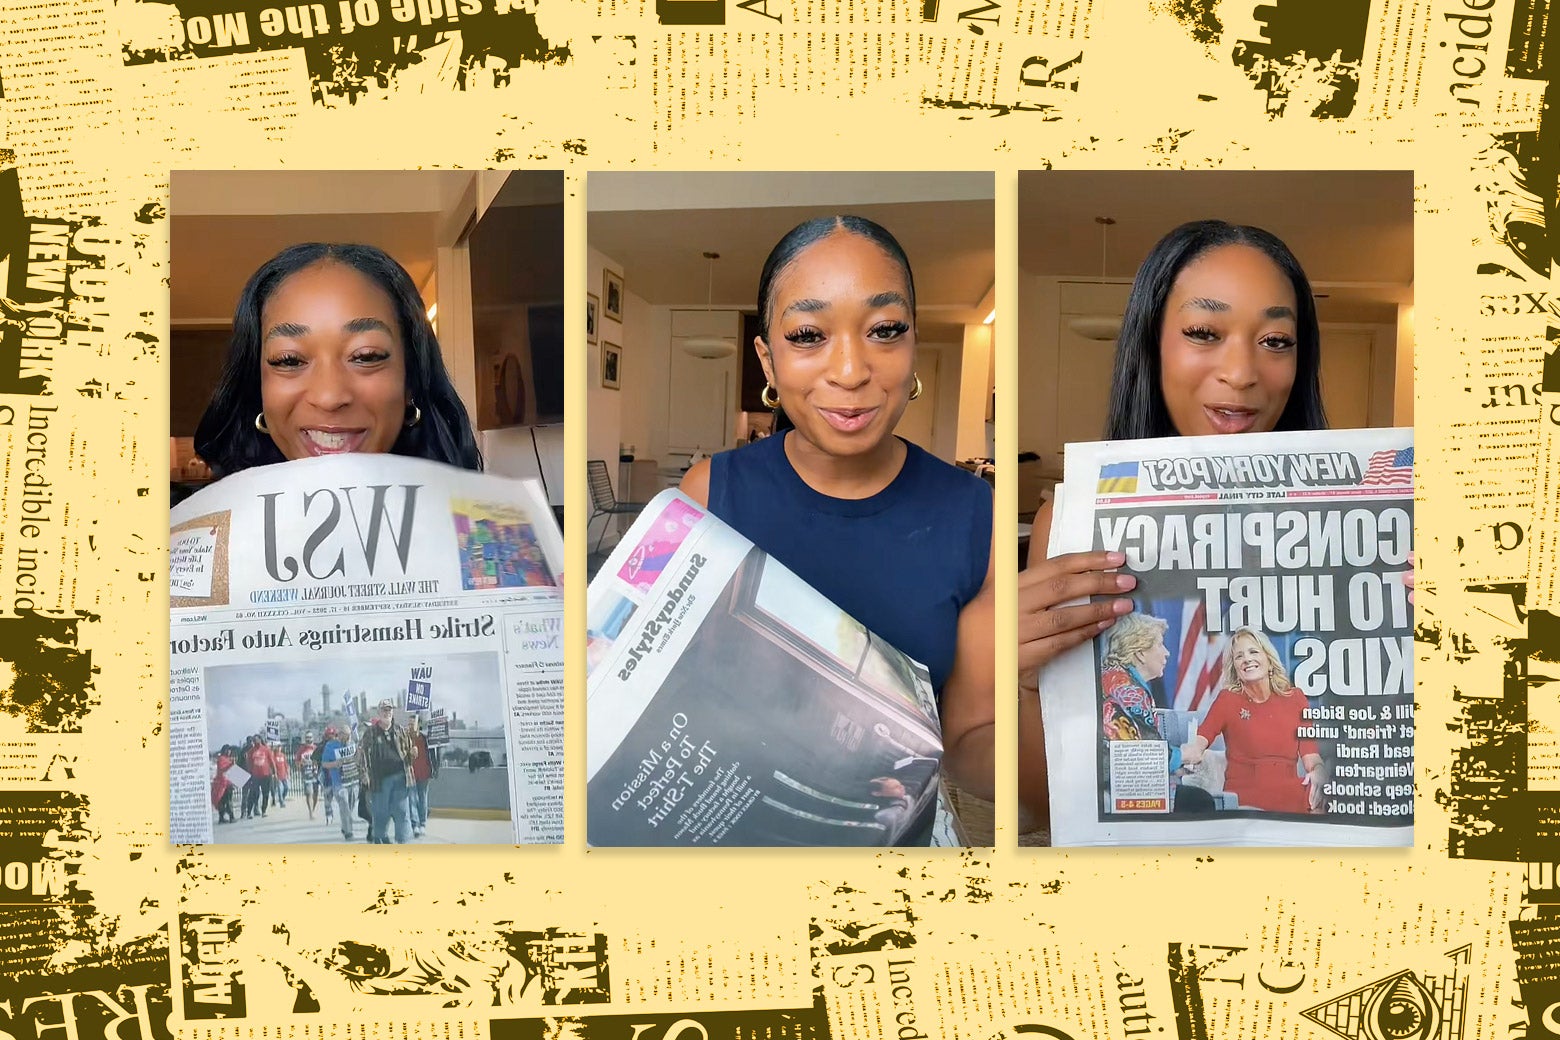 Three still images of Kelsey Russell, TikTok's Gen Z newspaper influencer, holding up various newspapers like the Wall Street Journal, New York Times, and New York Post, on a background of newspaper print. 